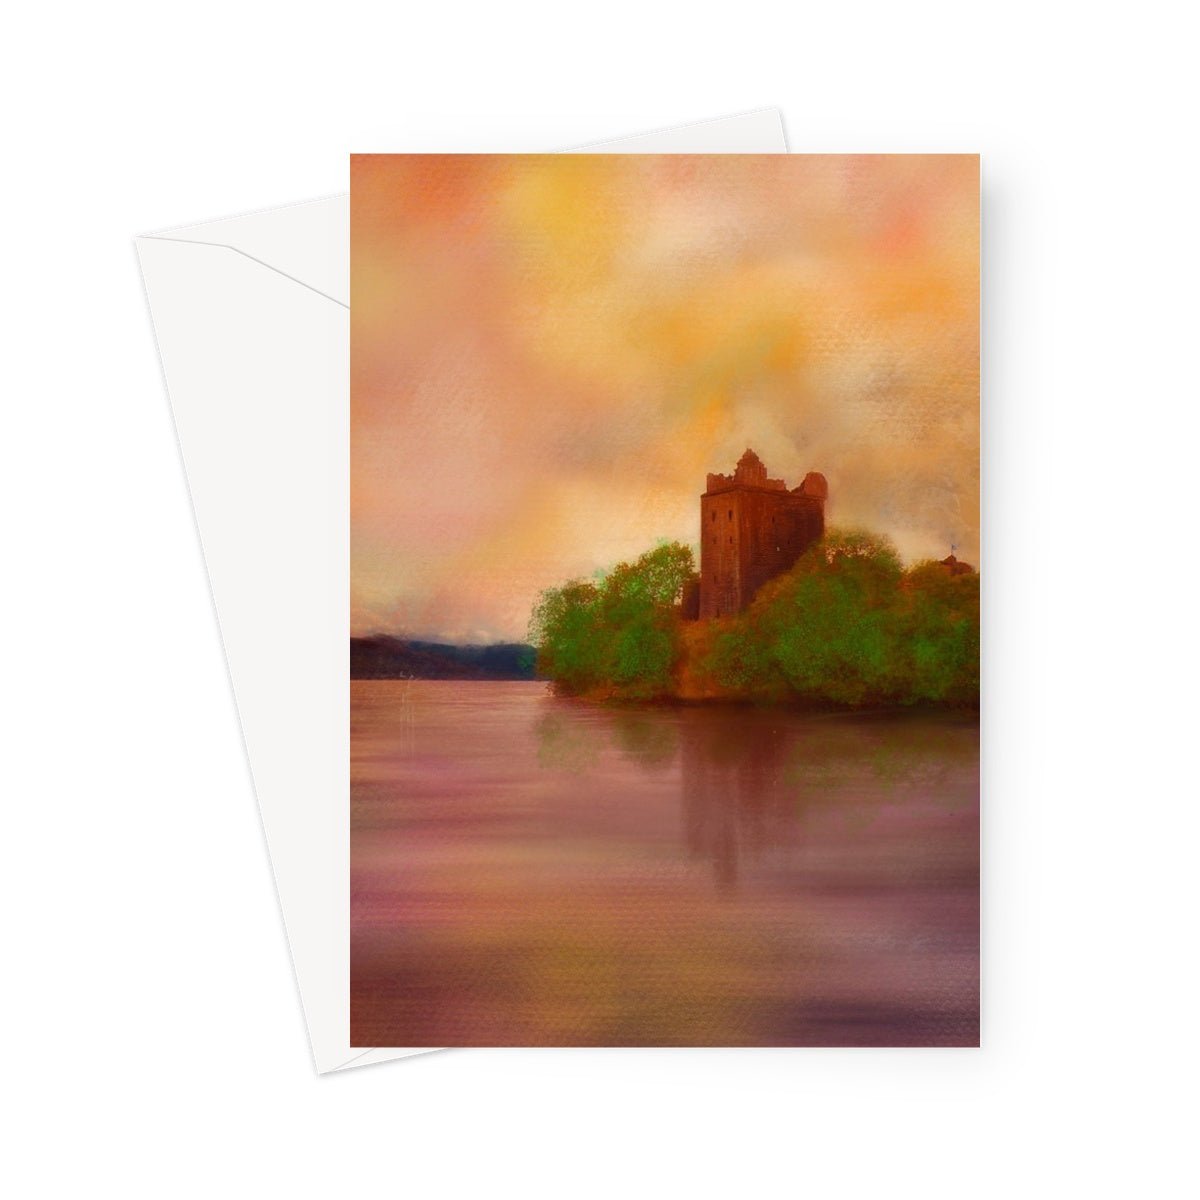 Urquhart Castle Art Gifts Greeting Card-Greetings Cards-Scottish Castles Art Gallery-5"x7"-1 Card-Paintings, Prints, Homeware, Art Gifts From Scotland By Scottish Artist Kevin Hunter